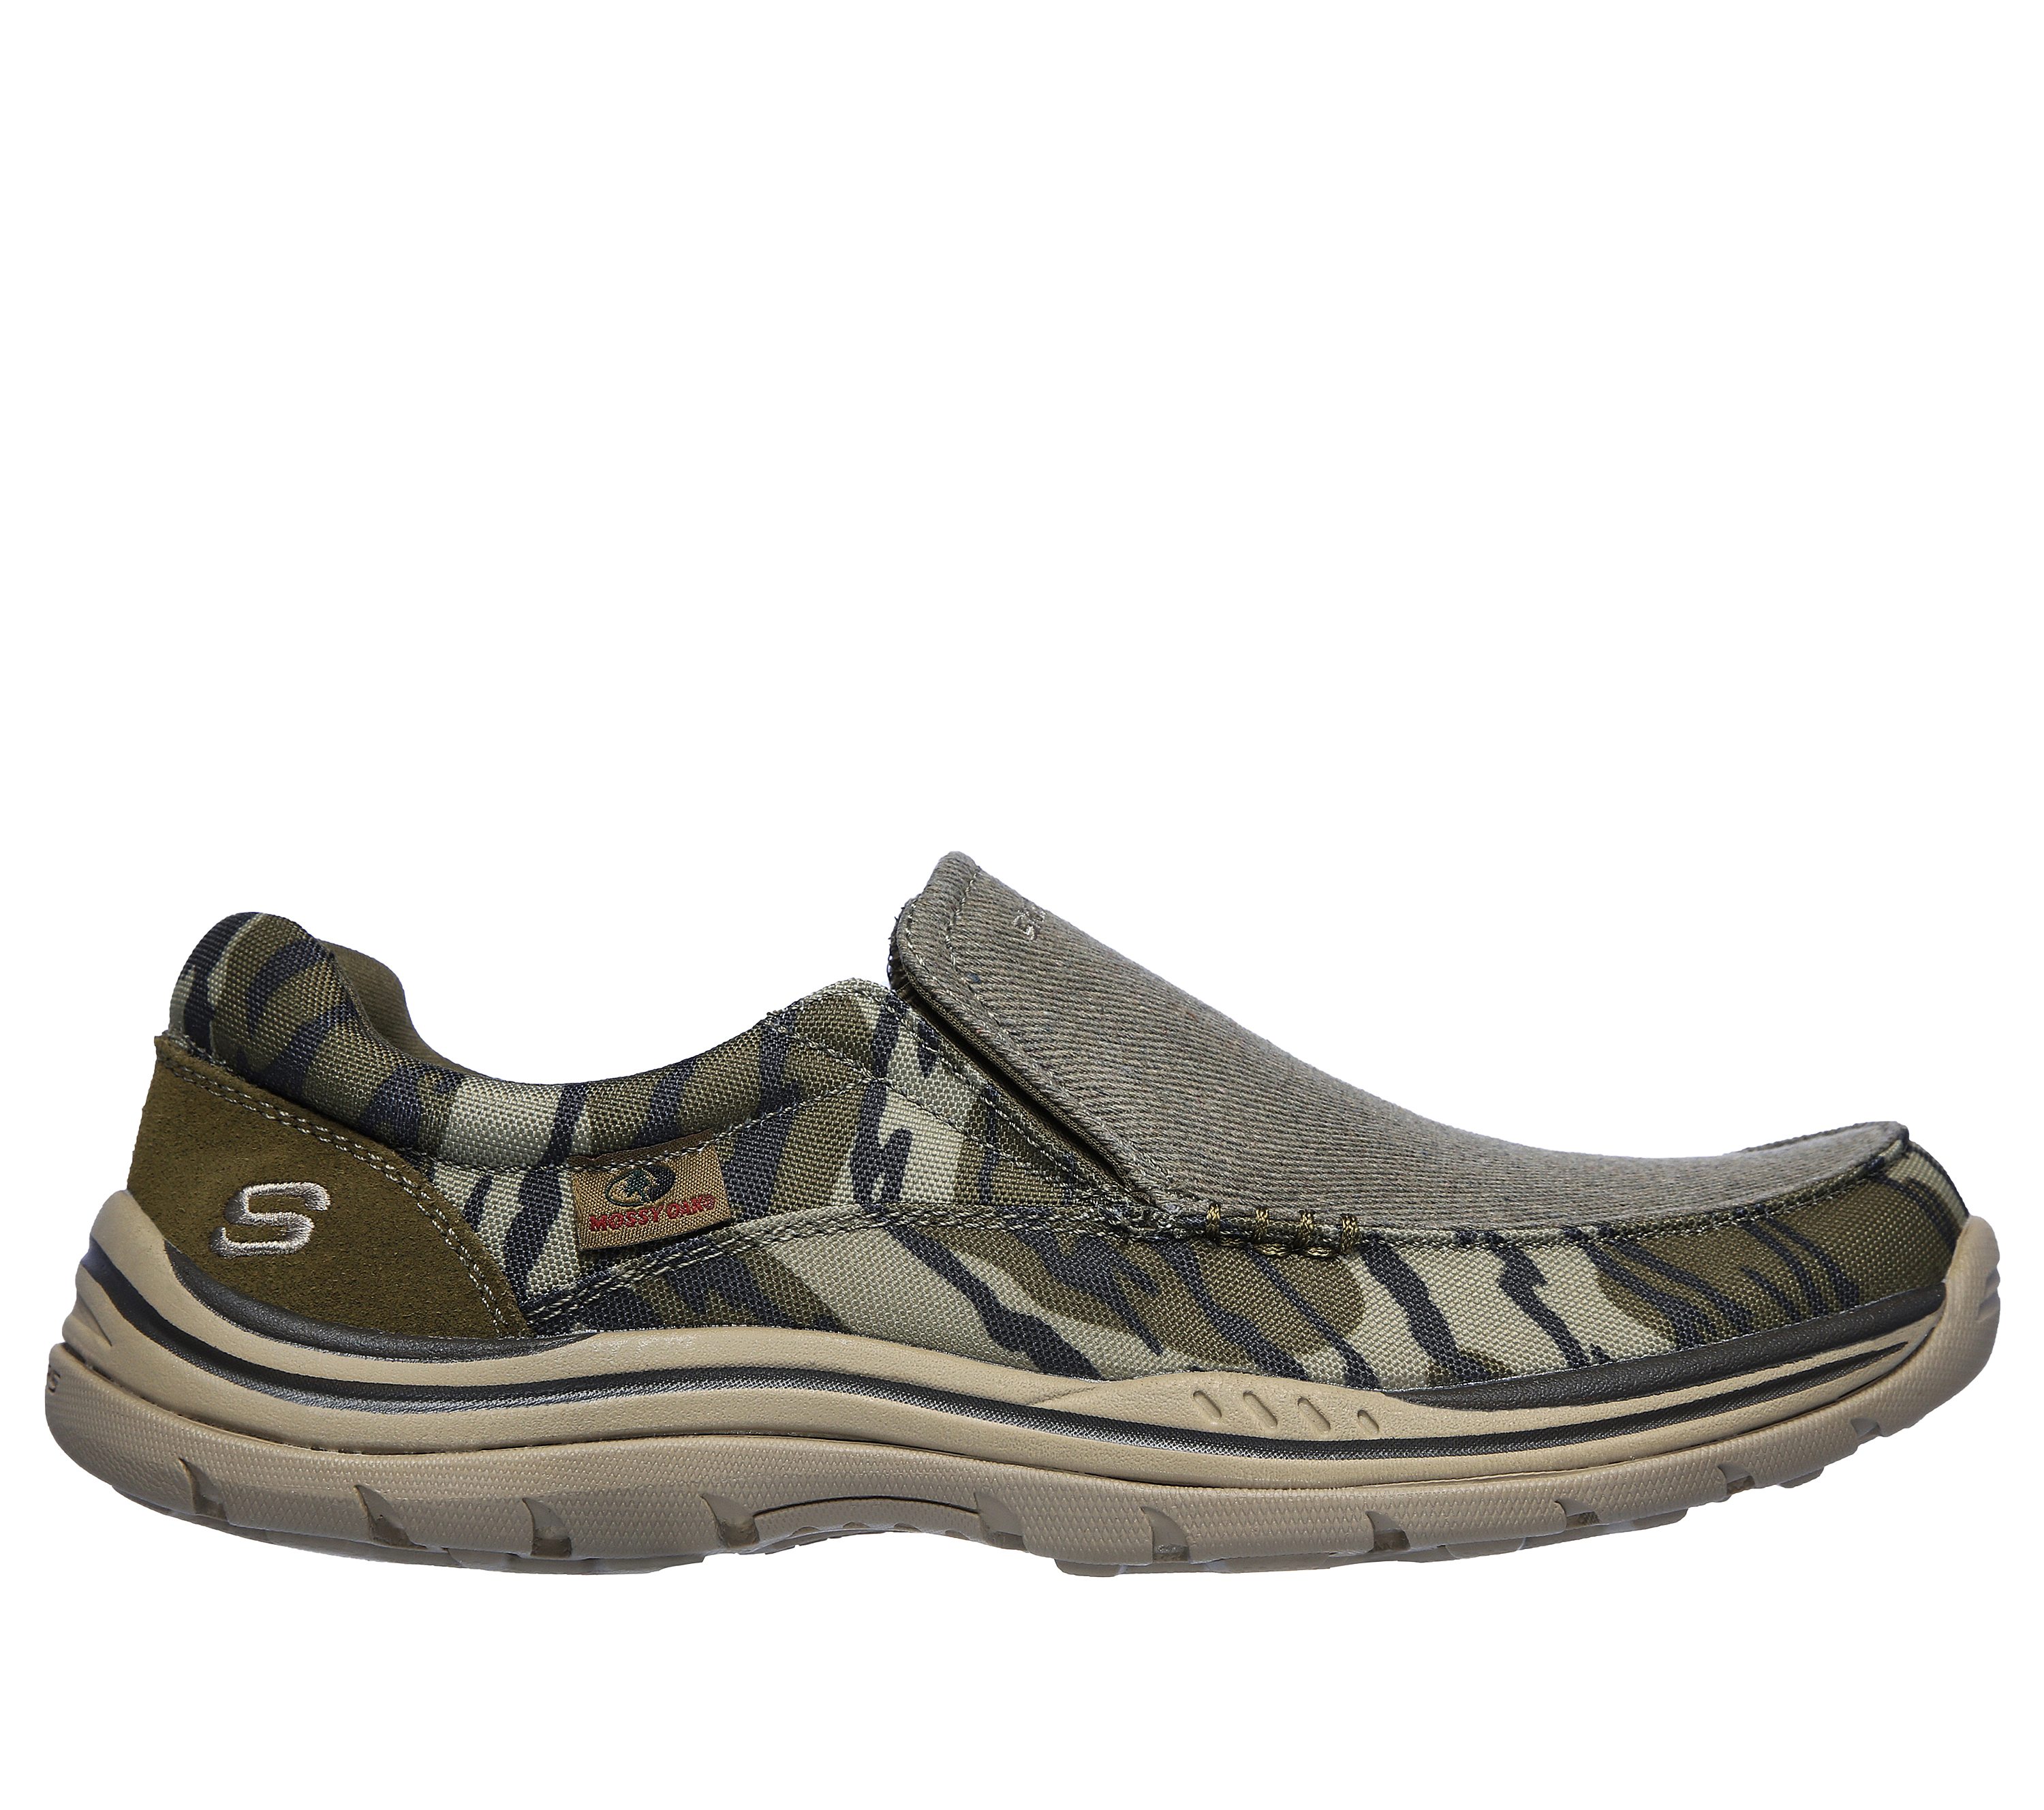 Gematigd climax Zee Relaxed Fit: Expected - Avillo | SKECHERS